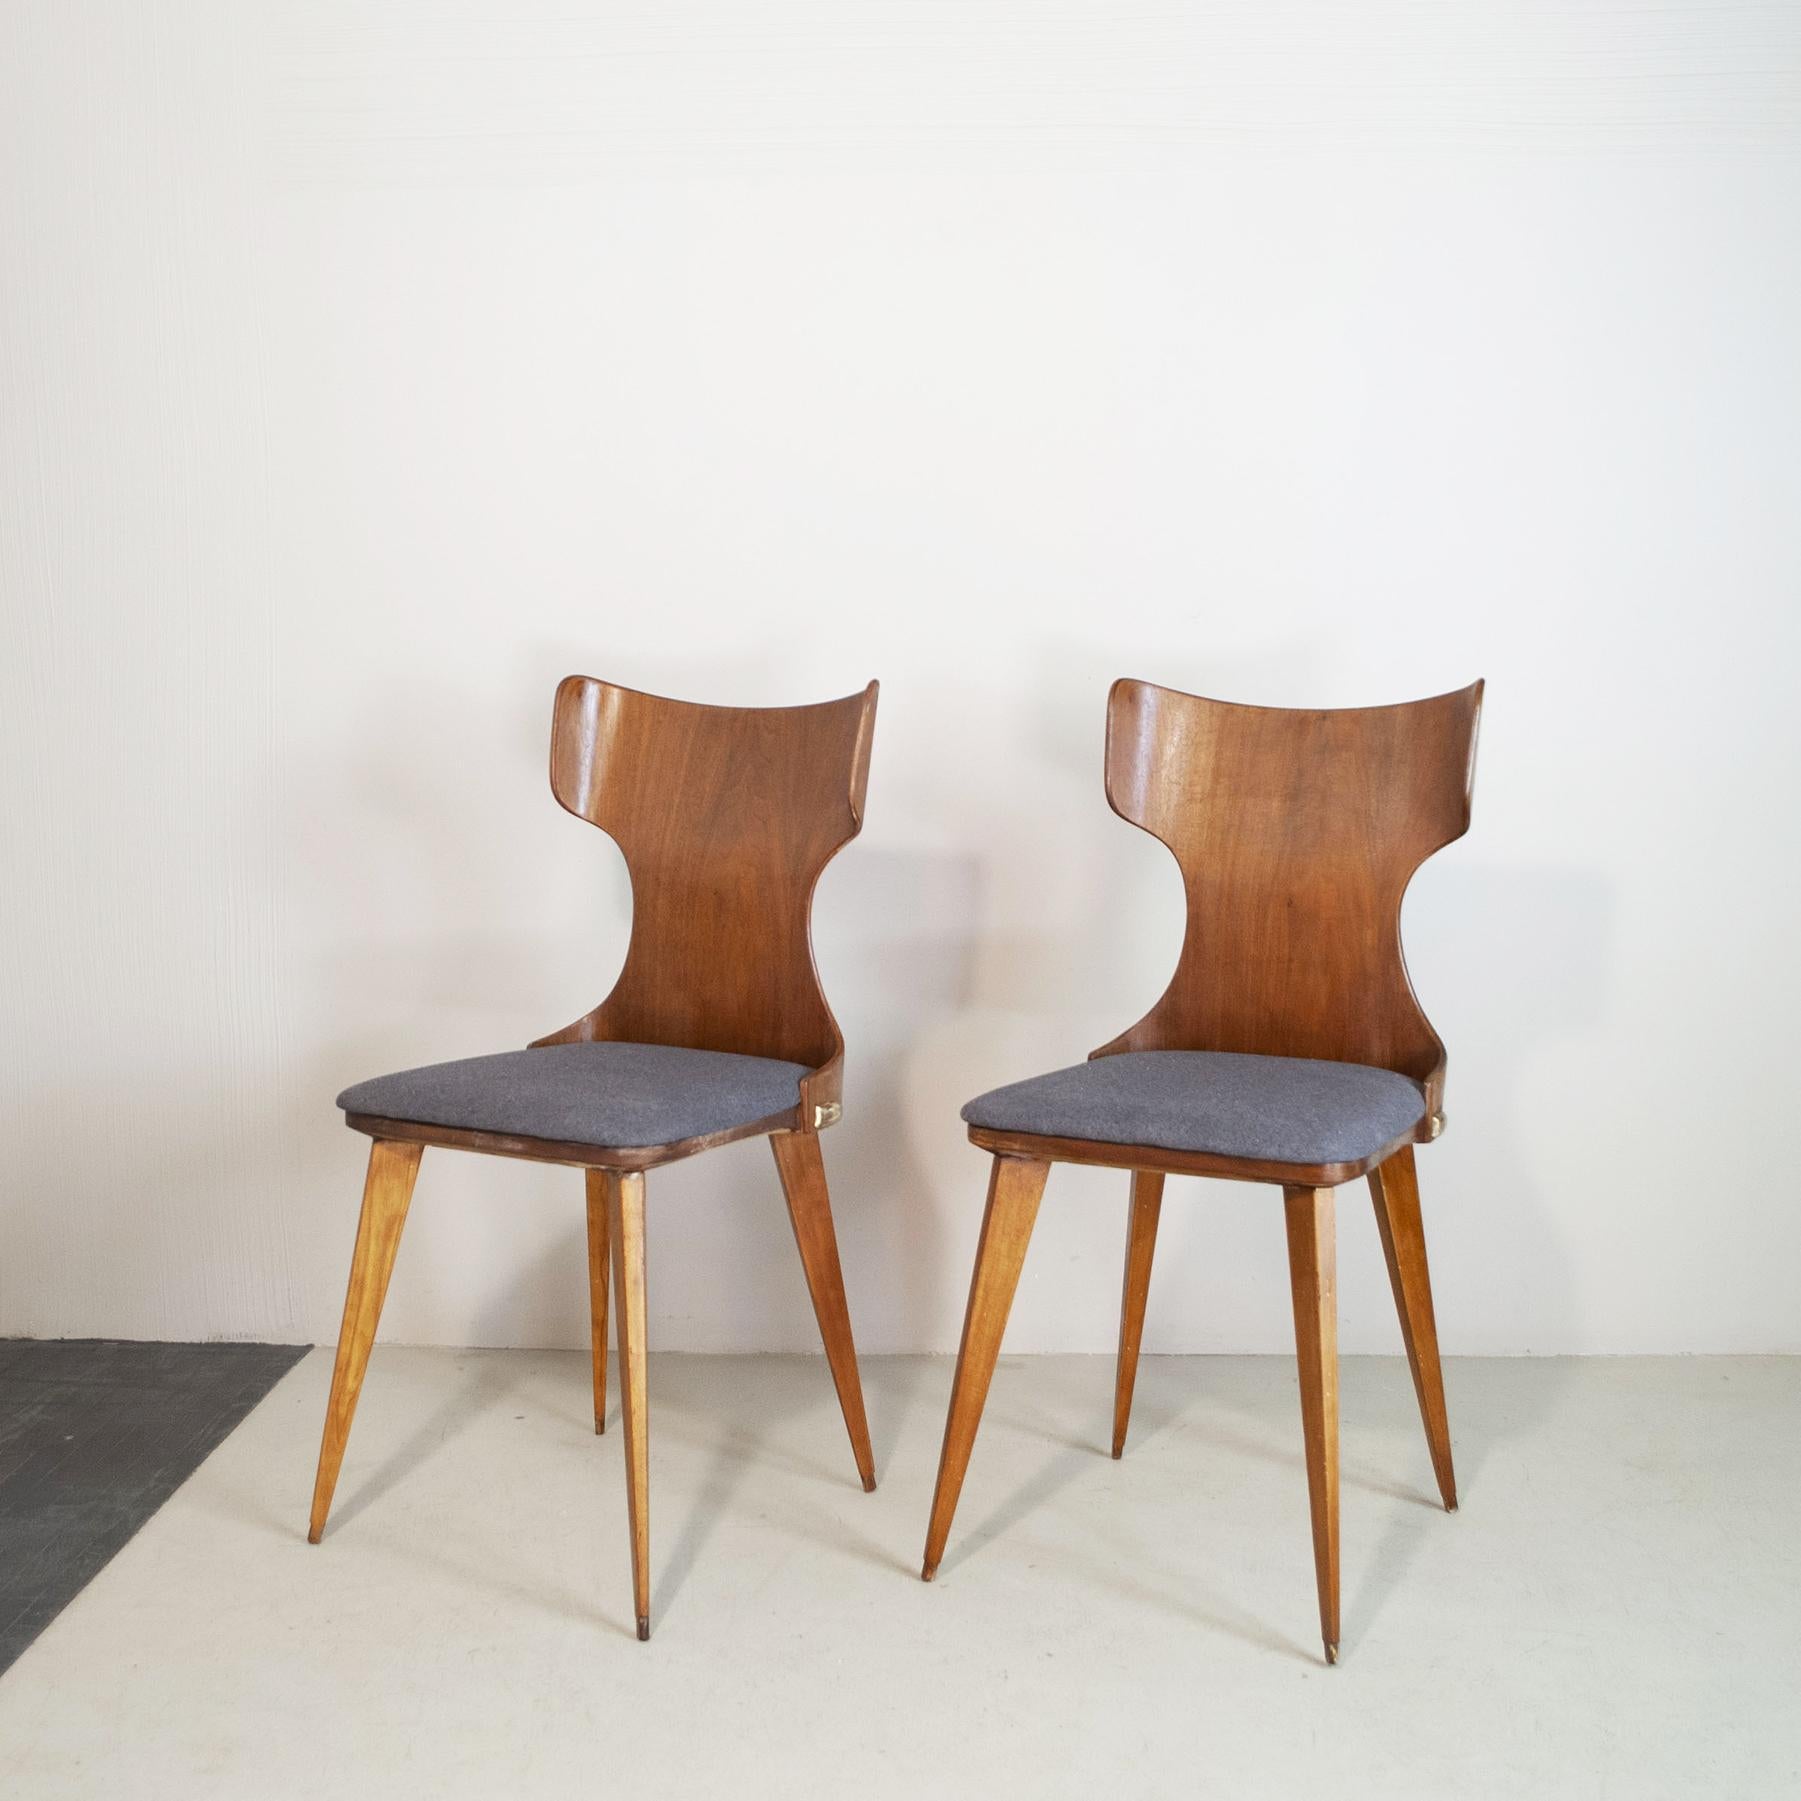 Carlo Ratti Italian Midcentury Chairs Form the Fifties For Sale 1